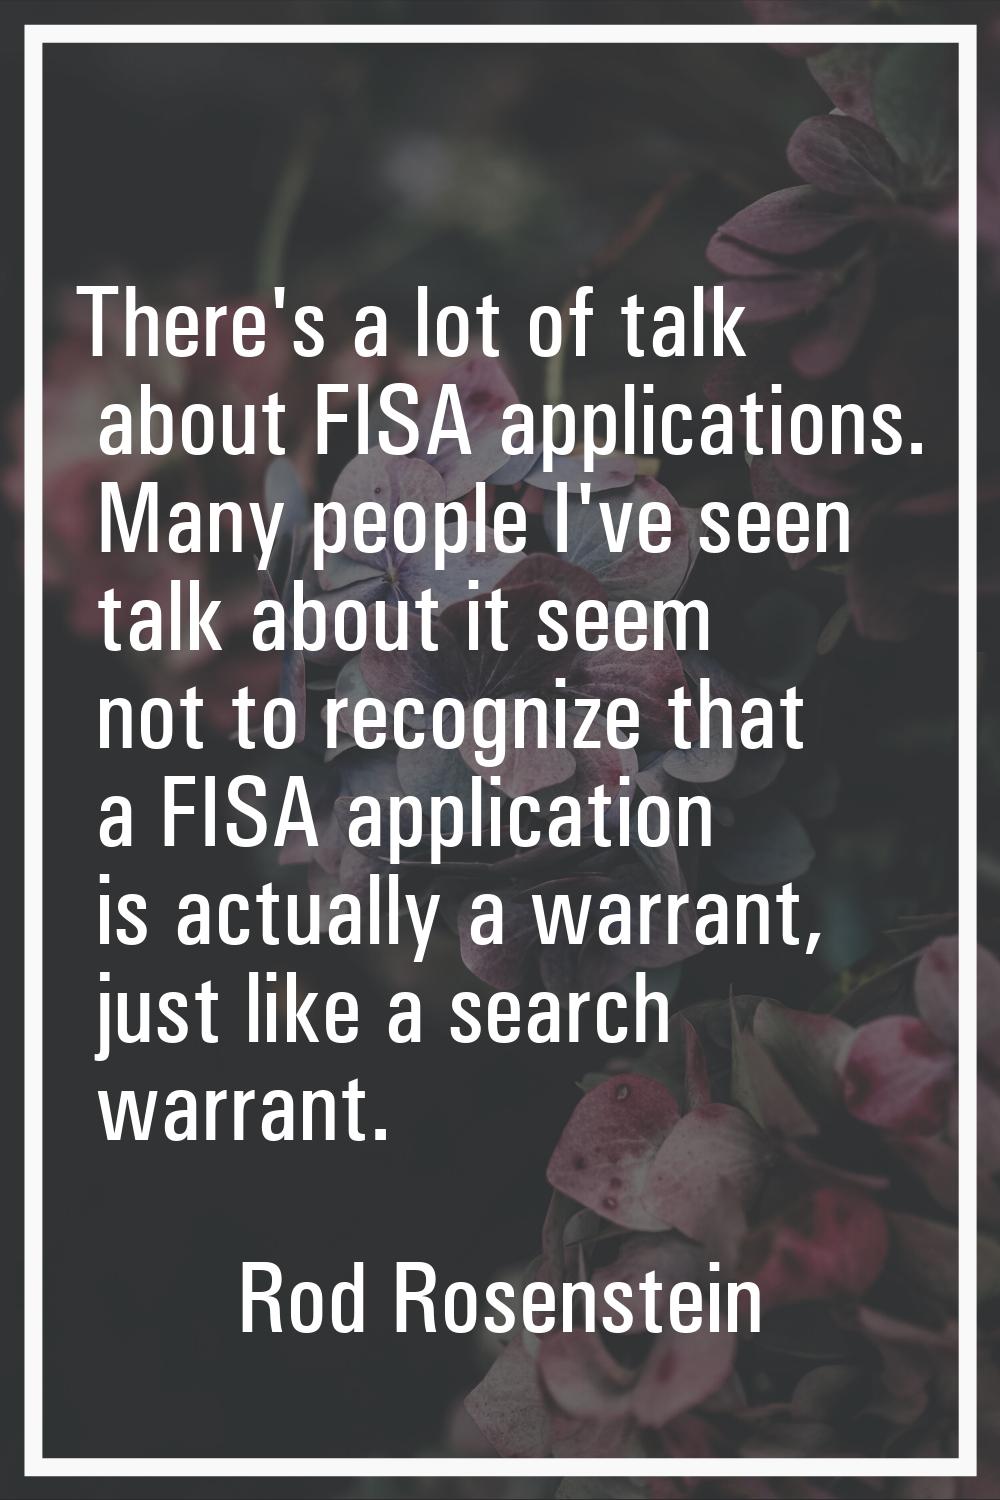 There's a lot of talk about FISA applications. Many people I've seen talk about it seem not to reco